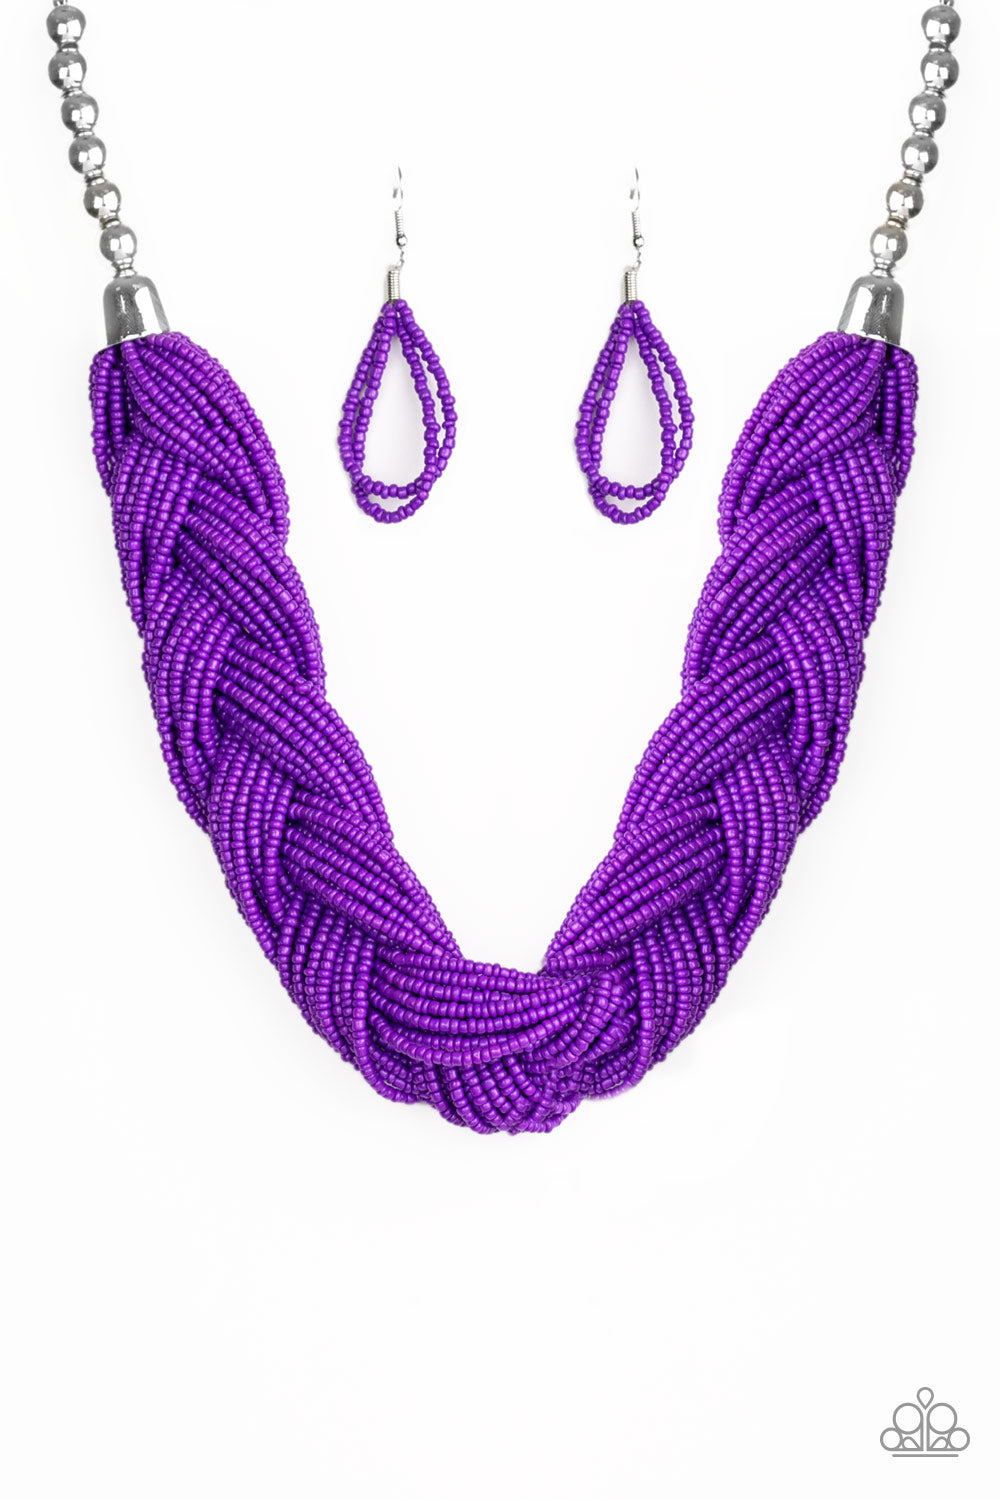 shop-sassy-affordable- the-great-outback-purple-paparazzi-accessories